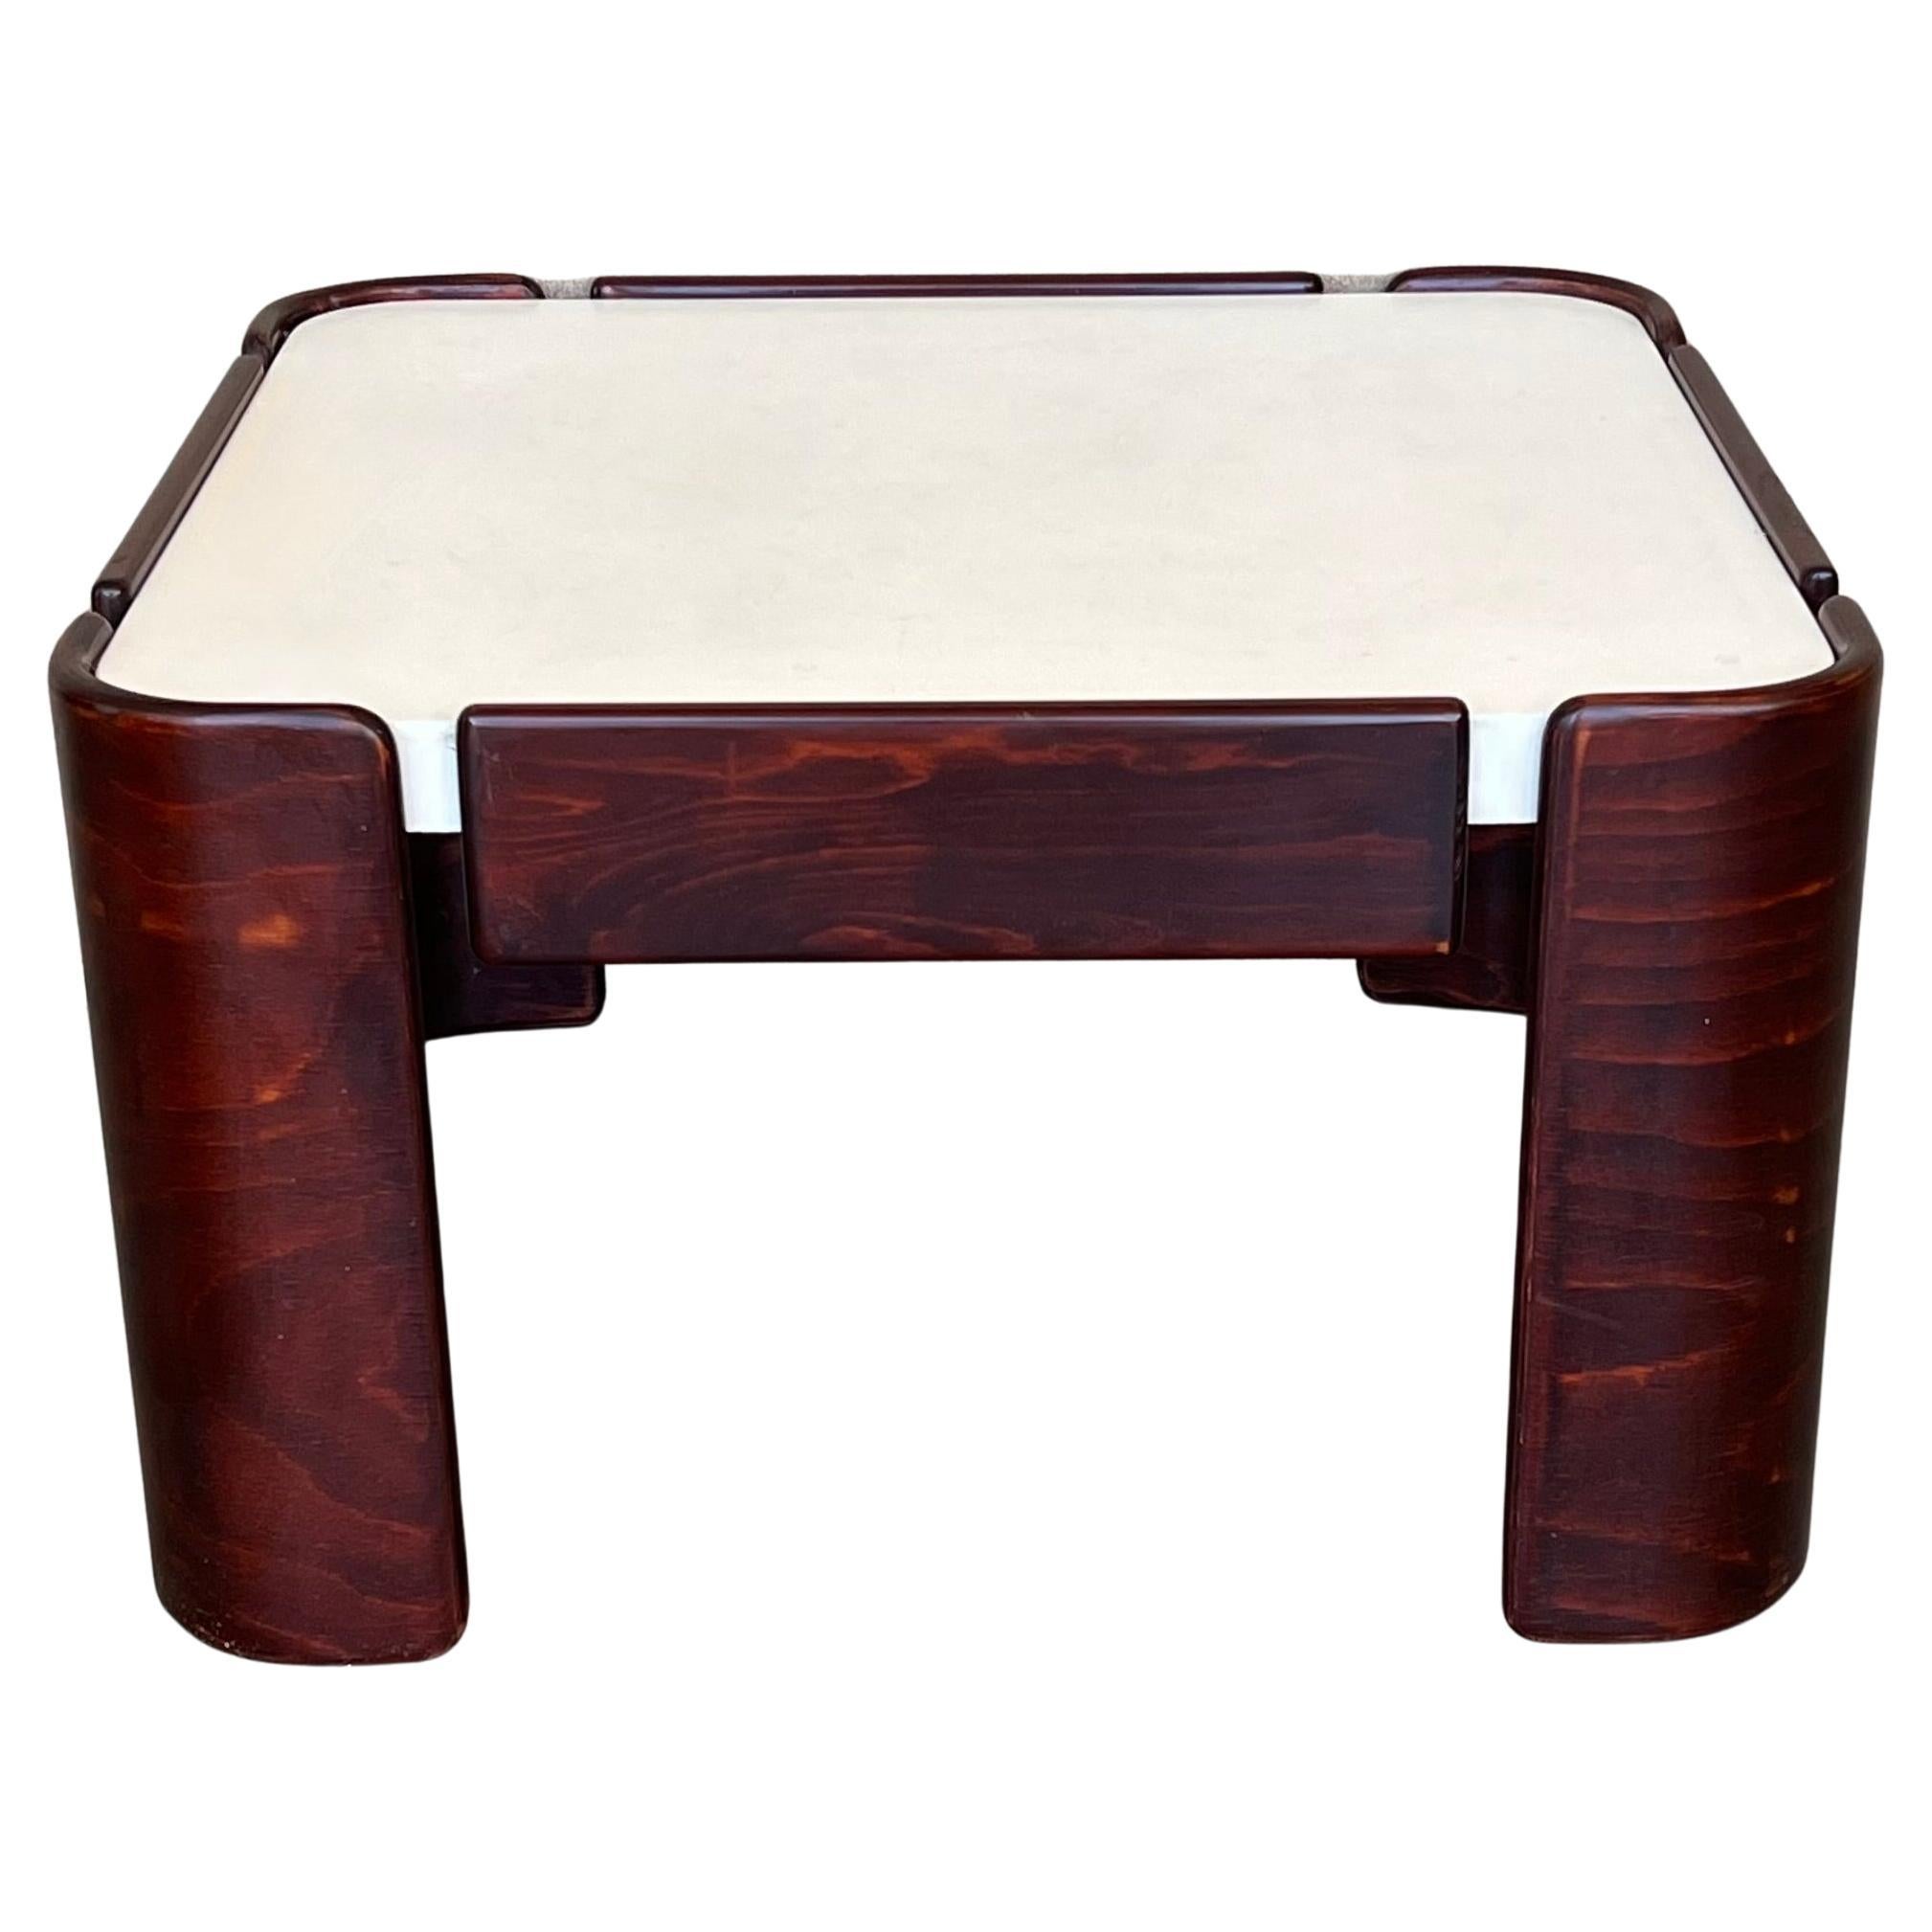 Mid-Century Modern Square Table with Curved Legs and White Top For Sale